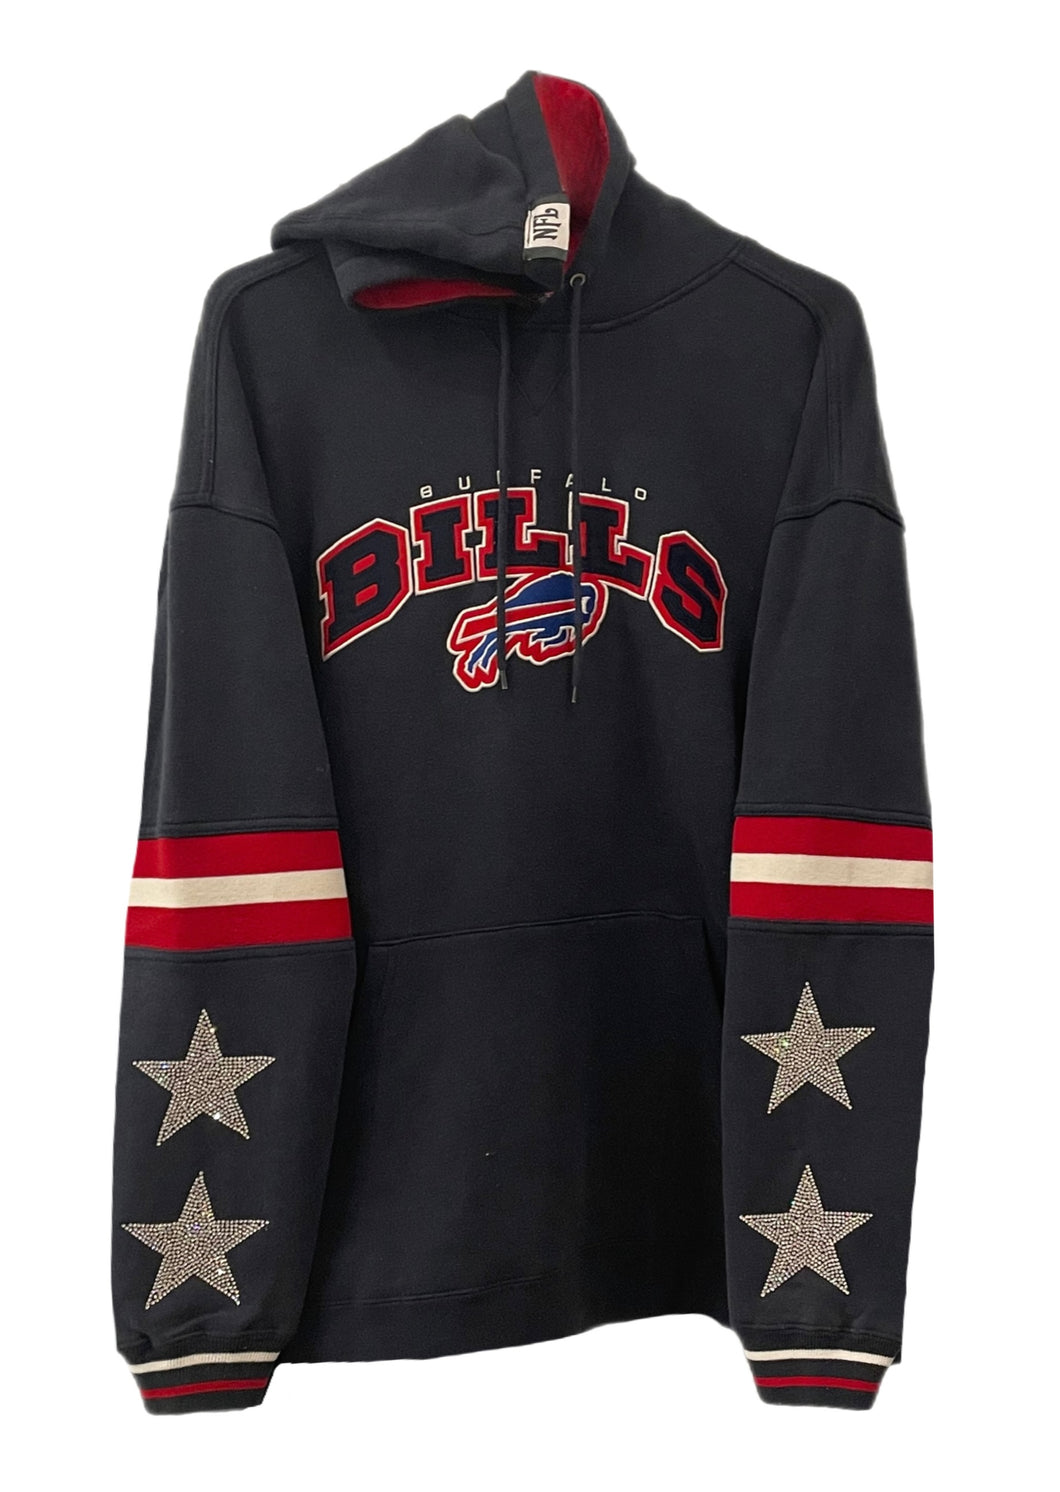 Buffalo Bills, NFL One of a KIND Vintage Hoodie with Crystal Star Design